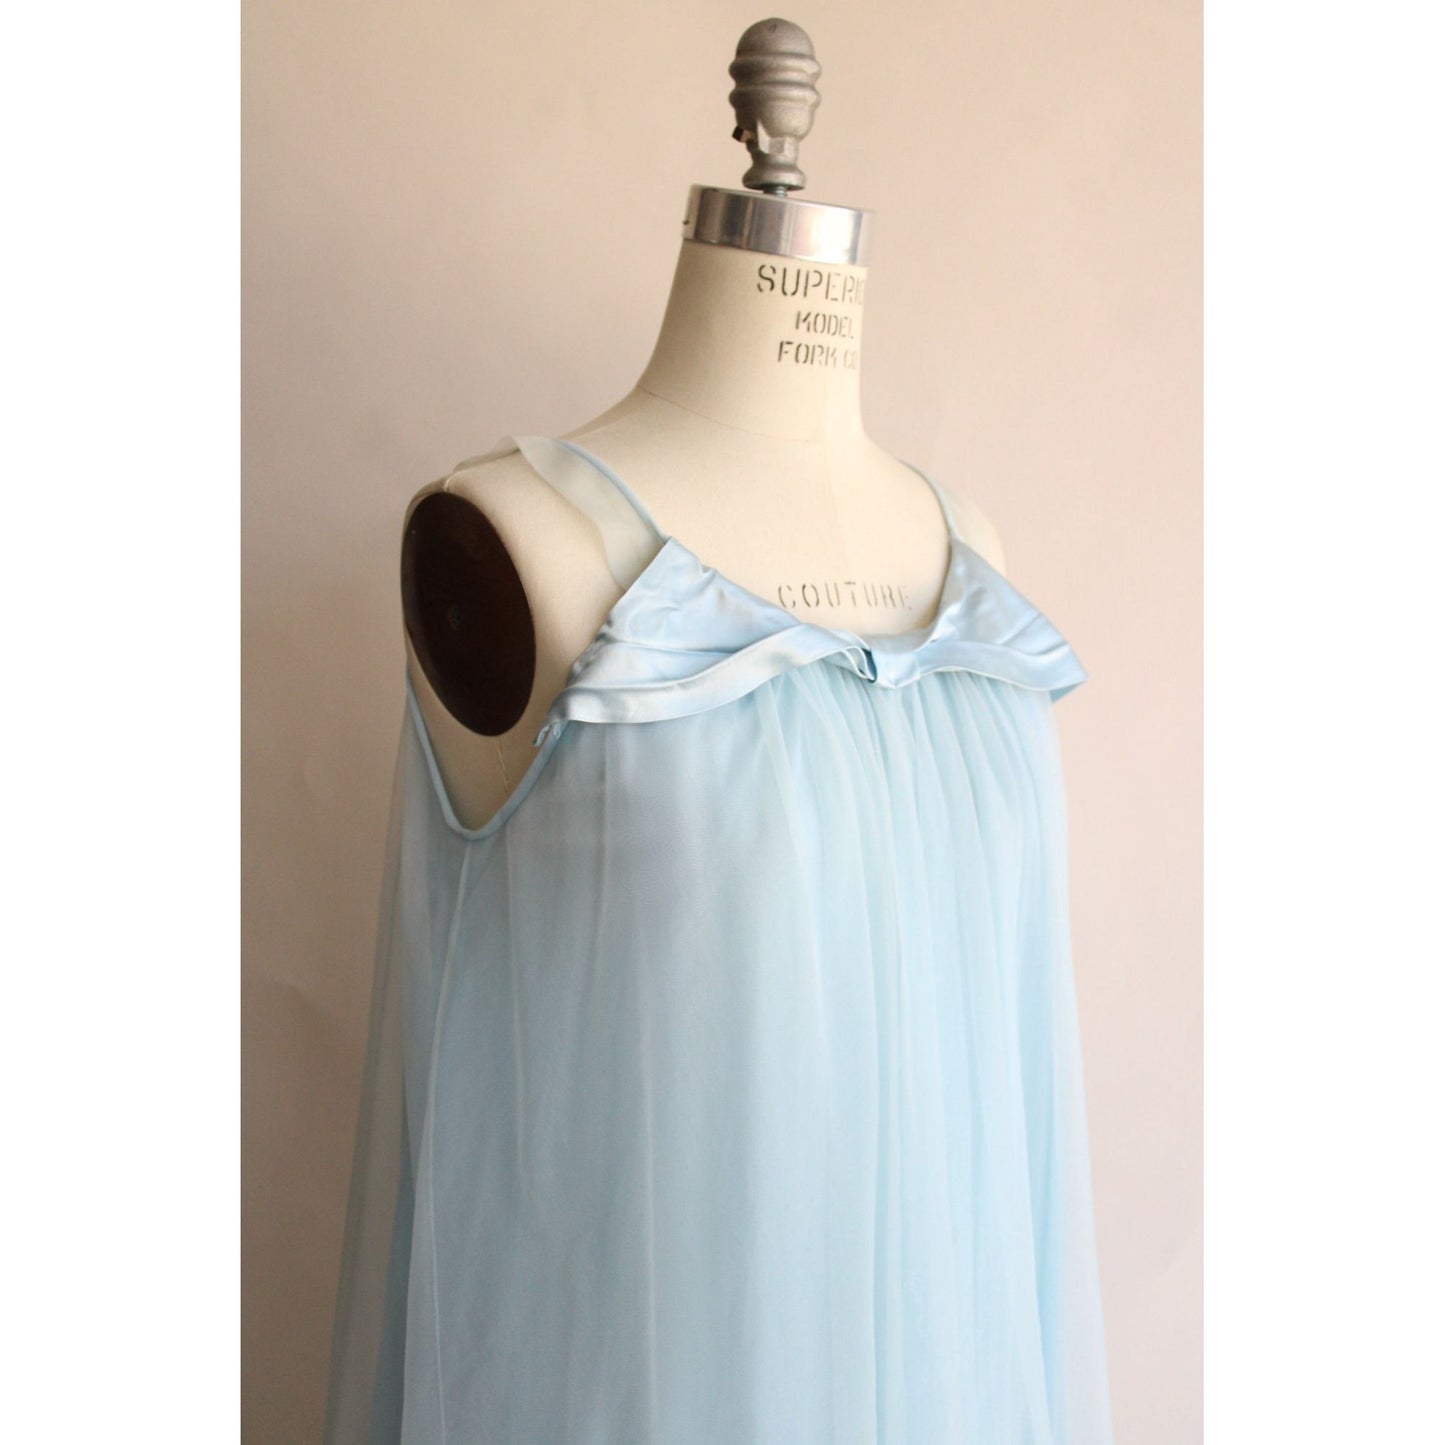 Vintage 1960s Nightgown Blue Babydoll Nightgown